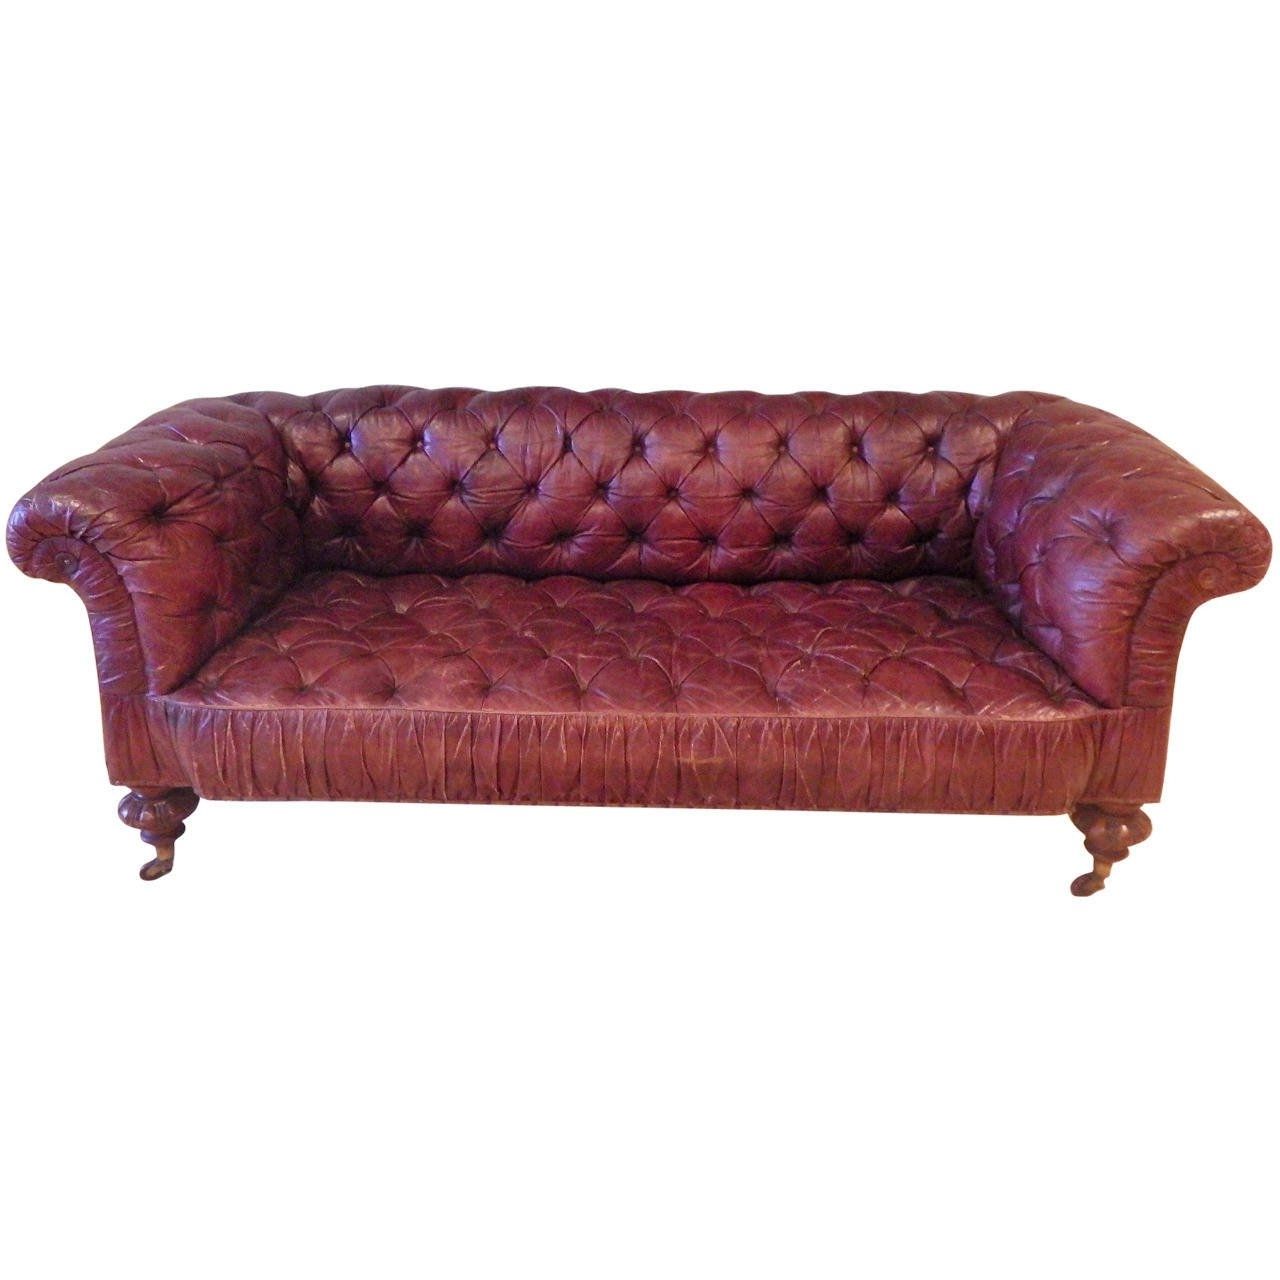 Victorian Leather Sofas Within Best And Newest Superb Victorian Leather Sofa, Circa 1870 For Sale At 1stdibs (View 2 of 20)